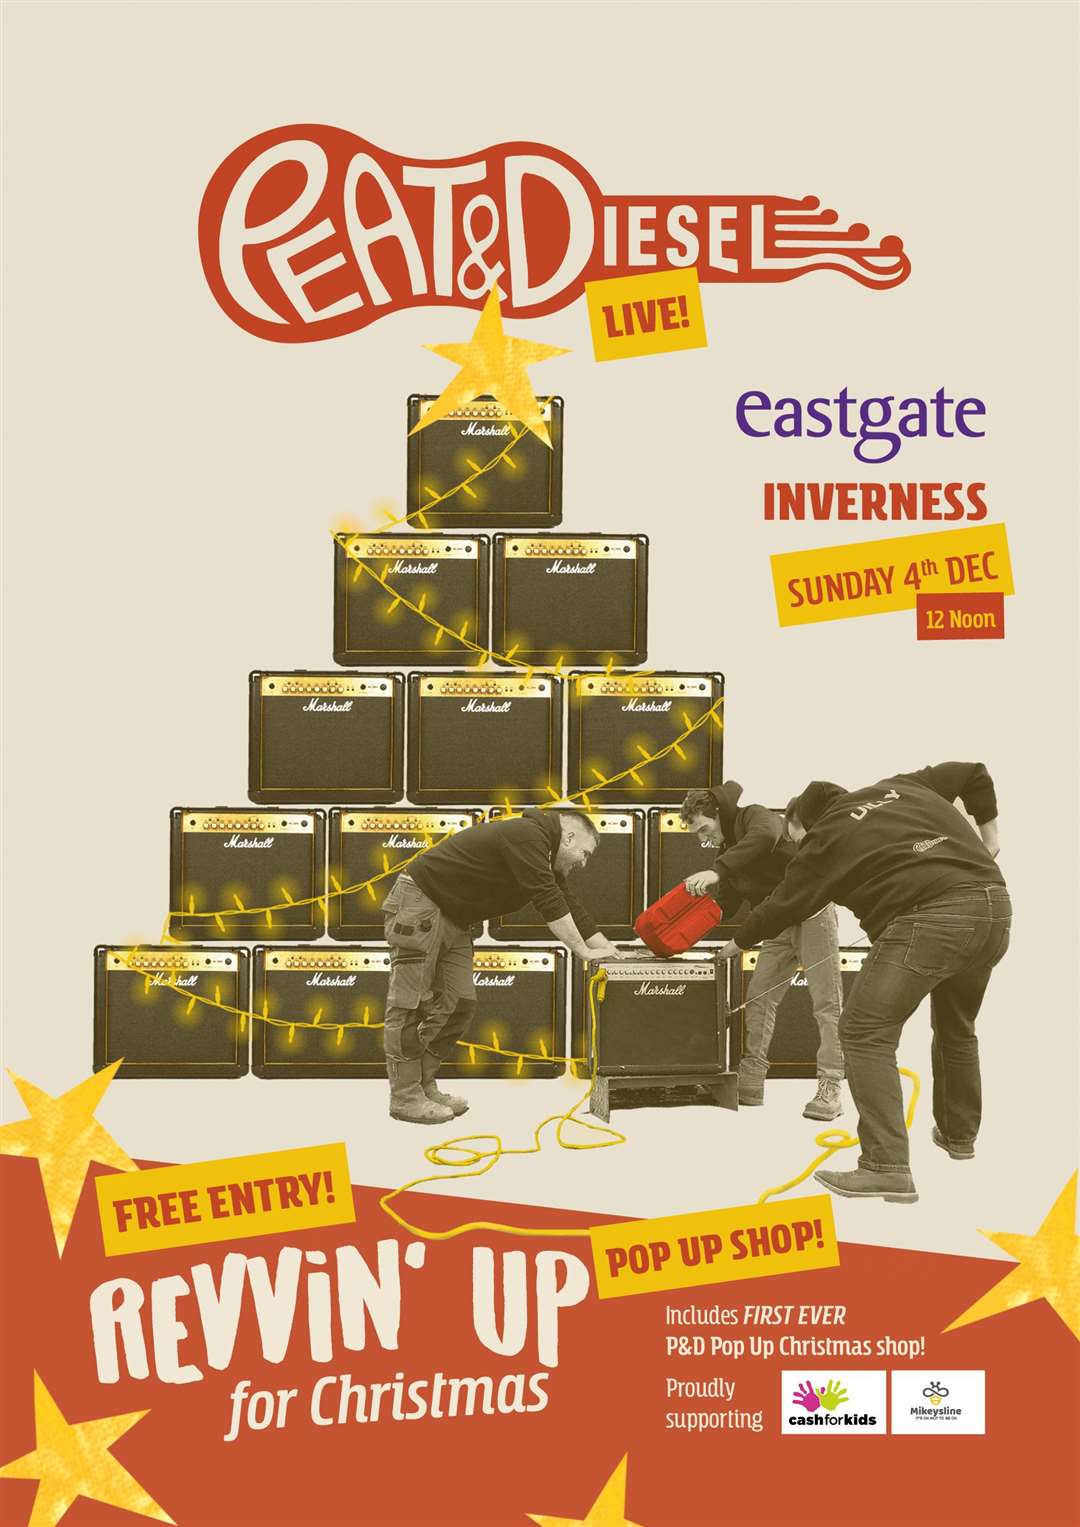 Catch Peat & Diesel at the Eastgate Centre.